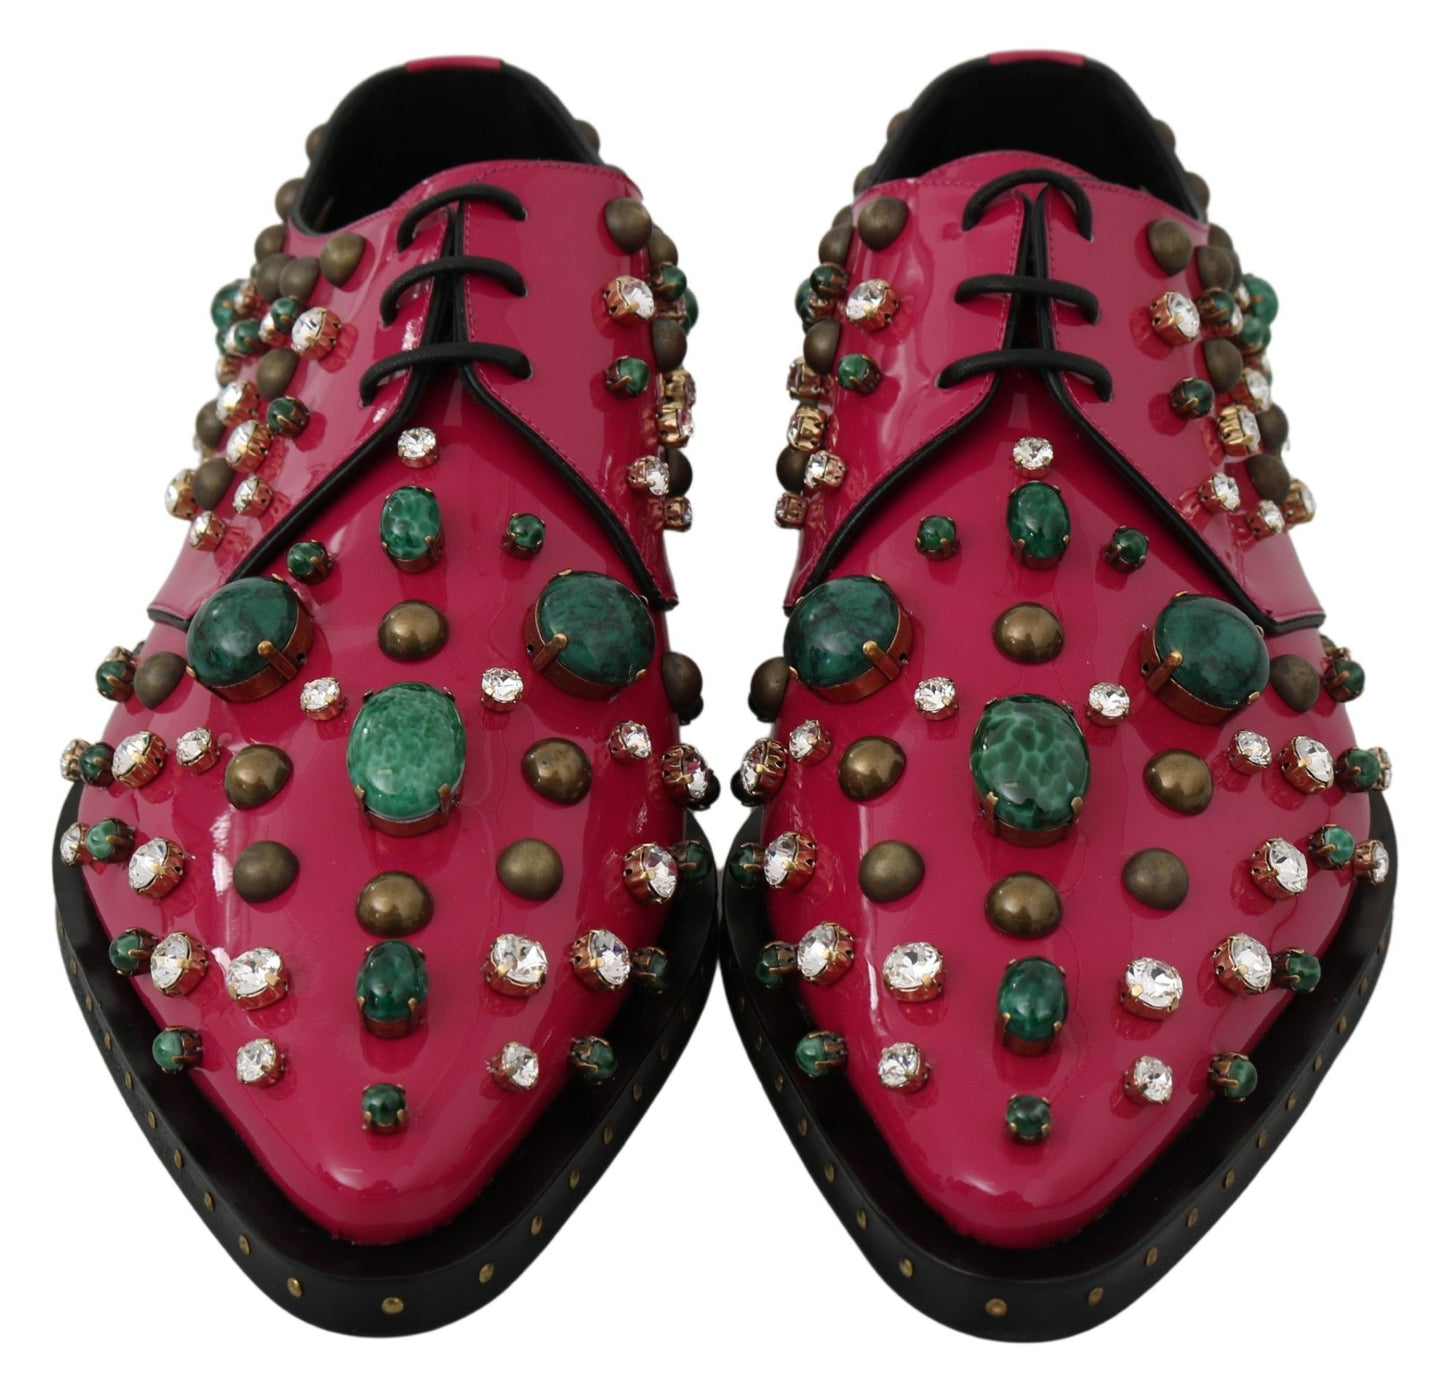 Dolce & Gabbana Pink Leather Crystals Dress Broque Shoes